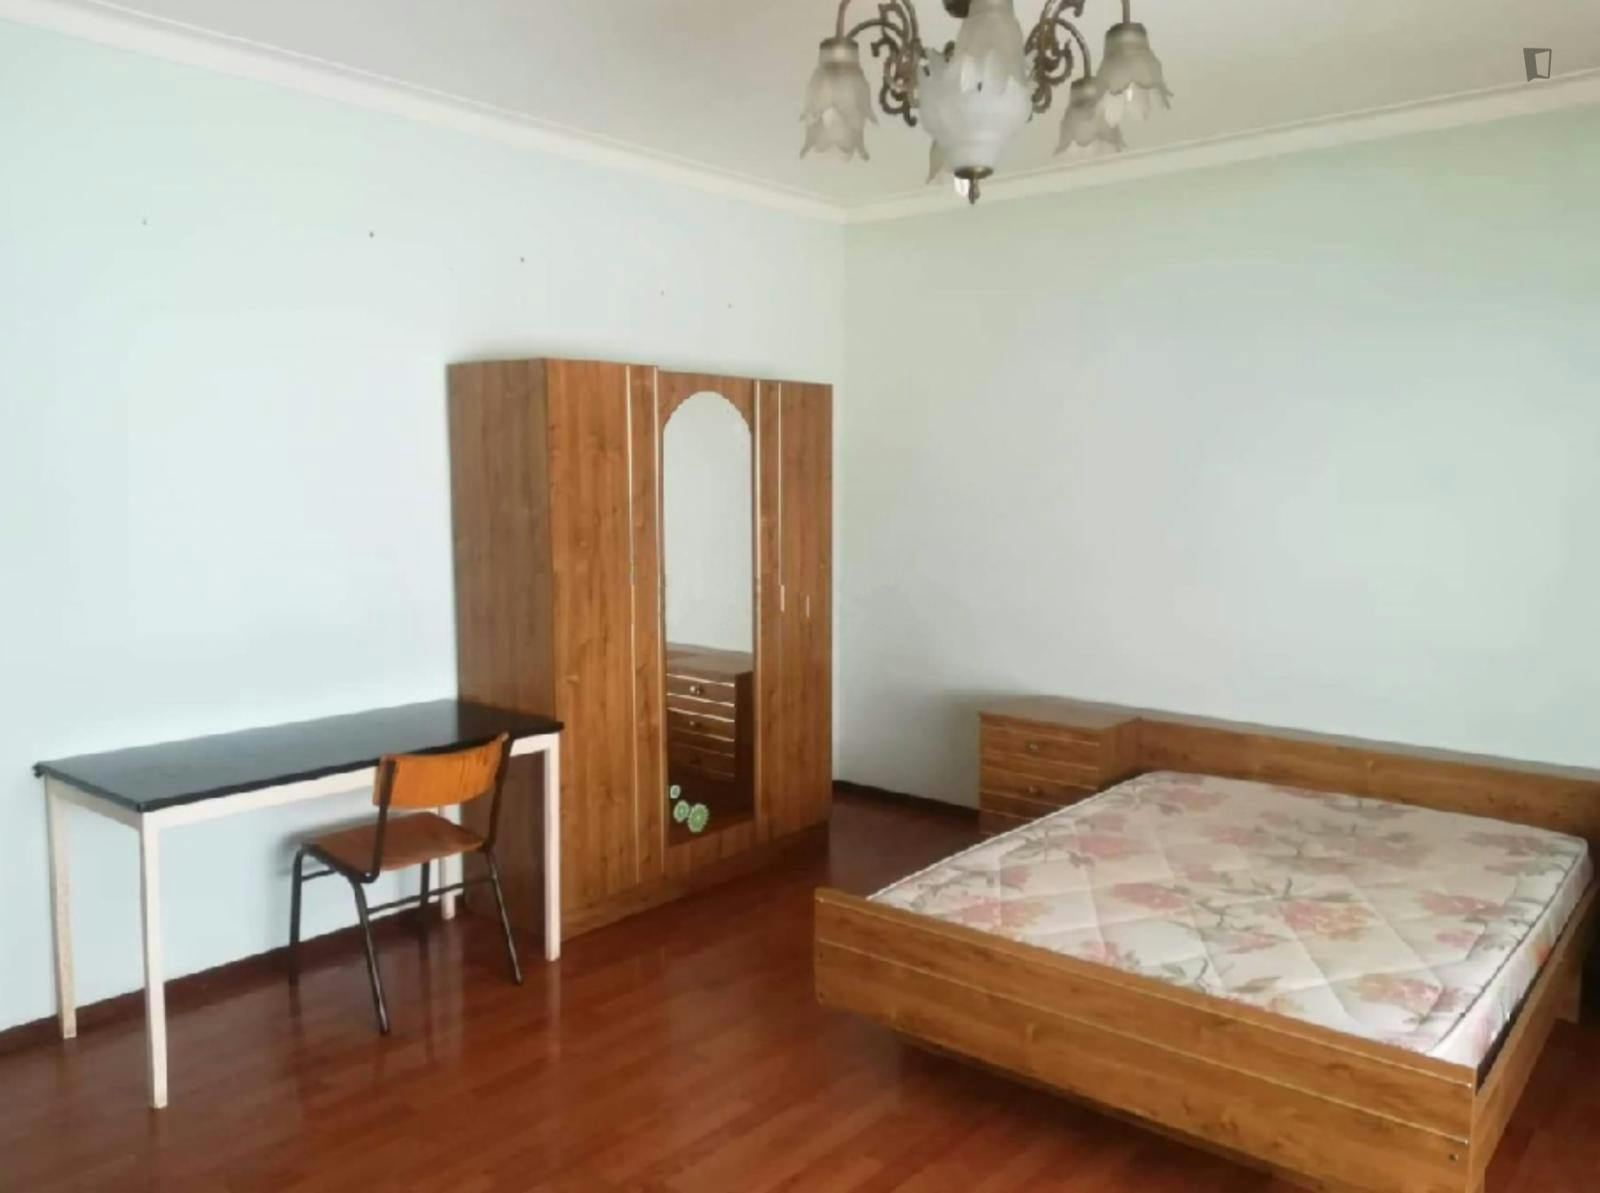 Spacious single bedroom close to Polytechnic Institute of Cávado and Ave